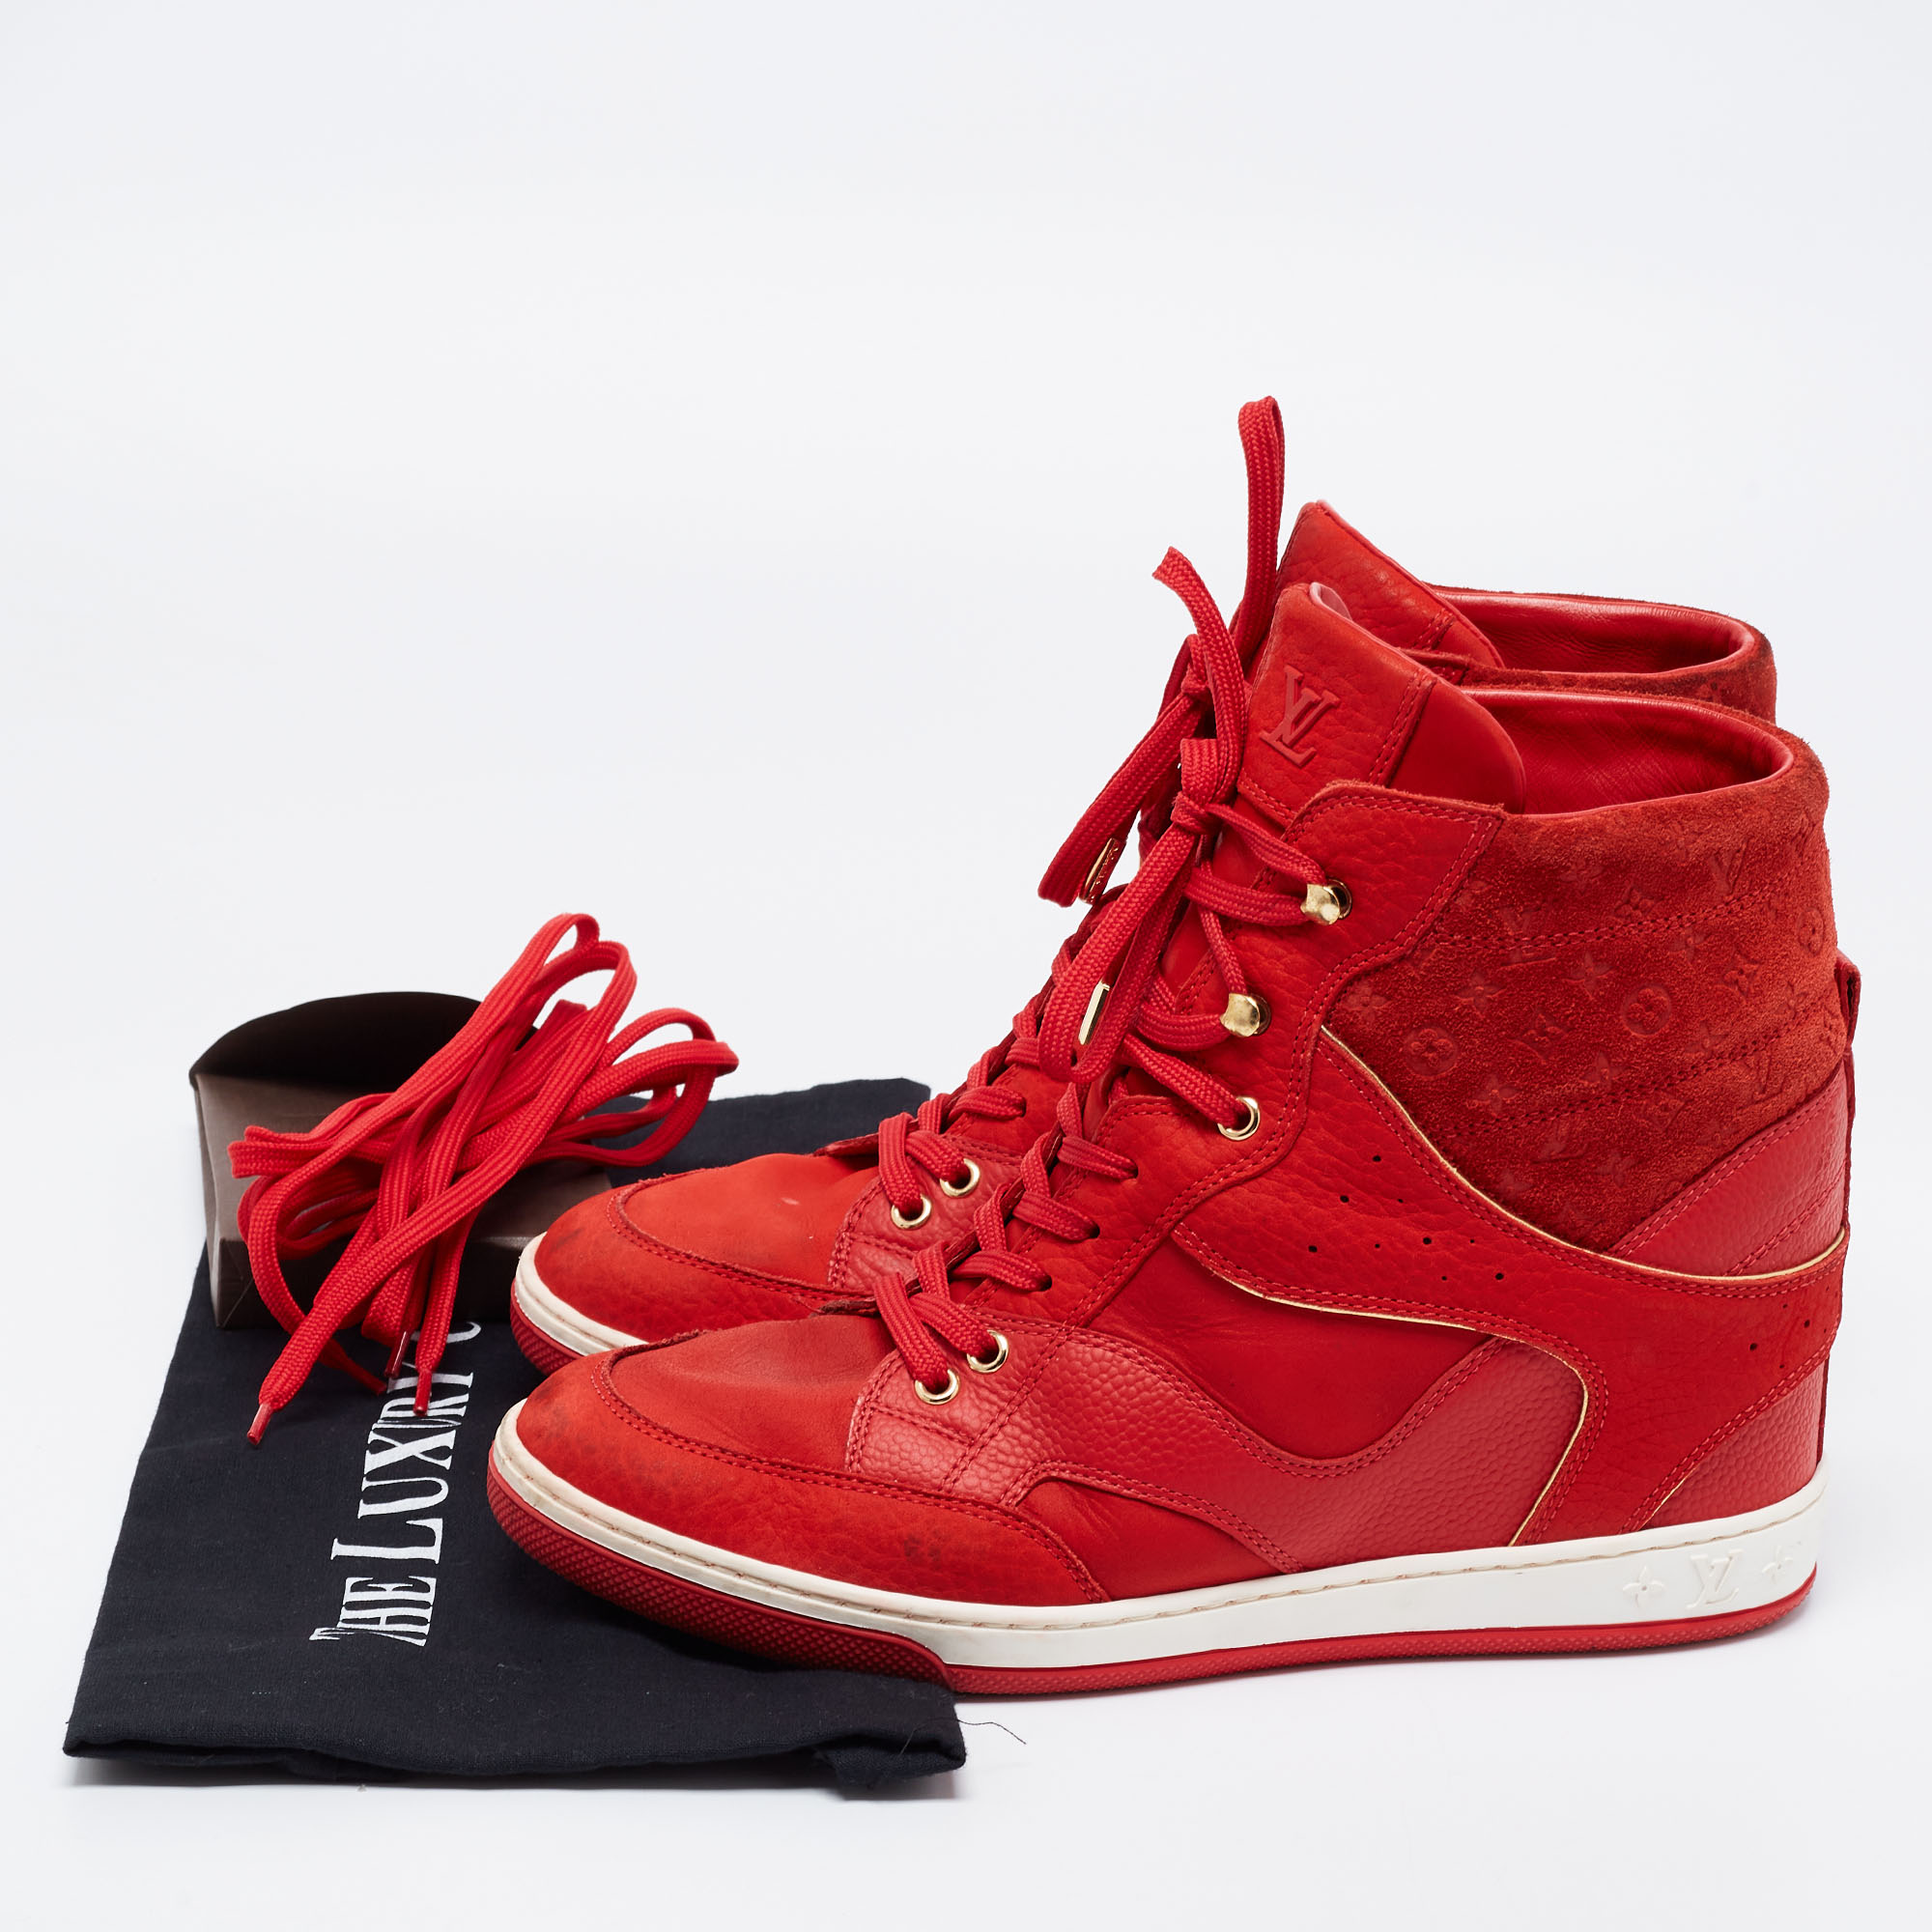 Louis Vuitton Red Leather And Embossed Monogram Suede Millenium Wedge Sneakers Size 39.5